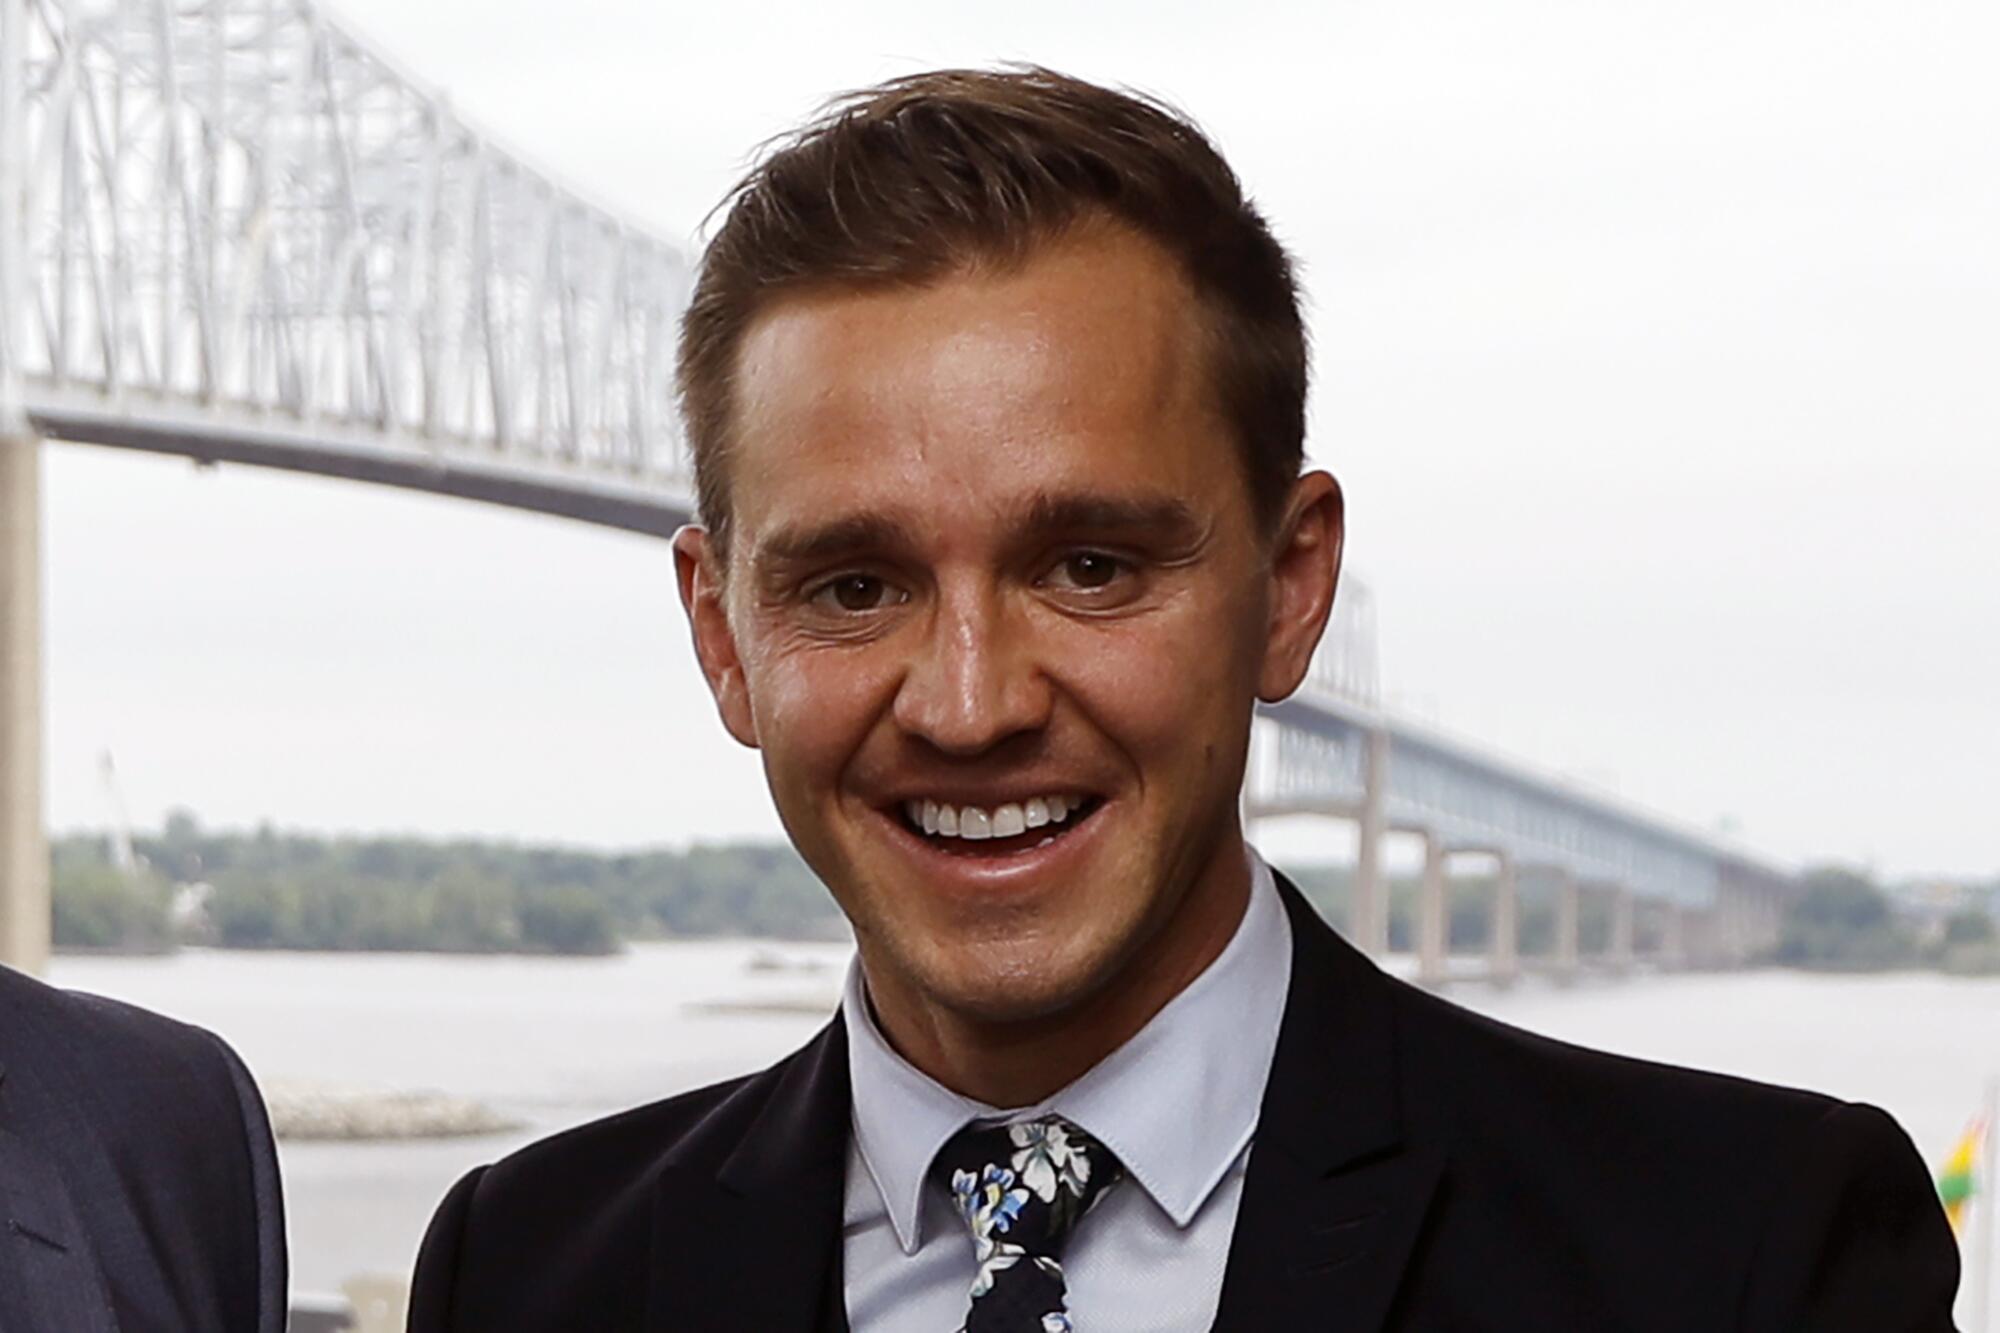 Fox Sports broadcaster Stuart Holden poses May 28, 2018, before a friendly between the U.S. and Bolivia in Chester, Pa.